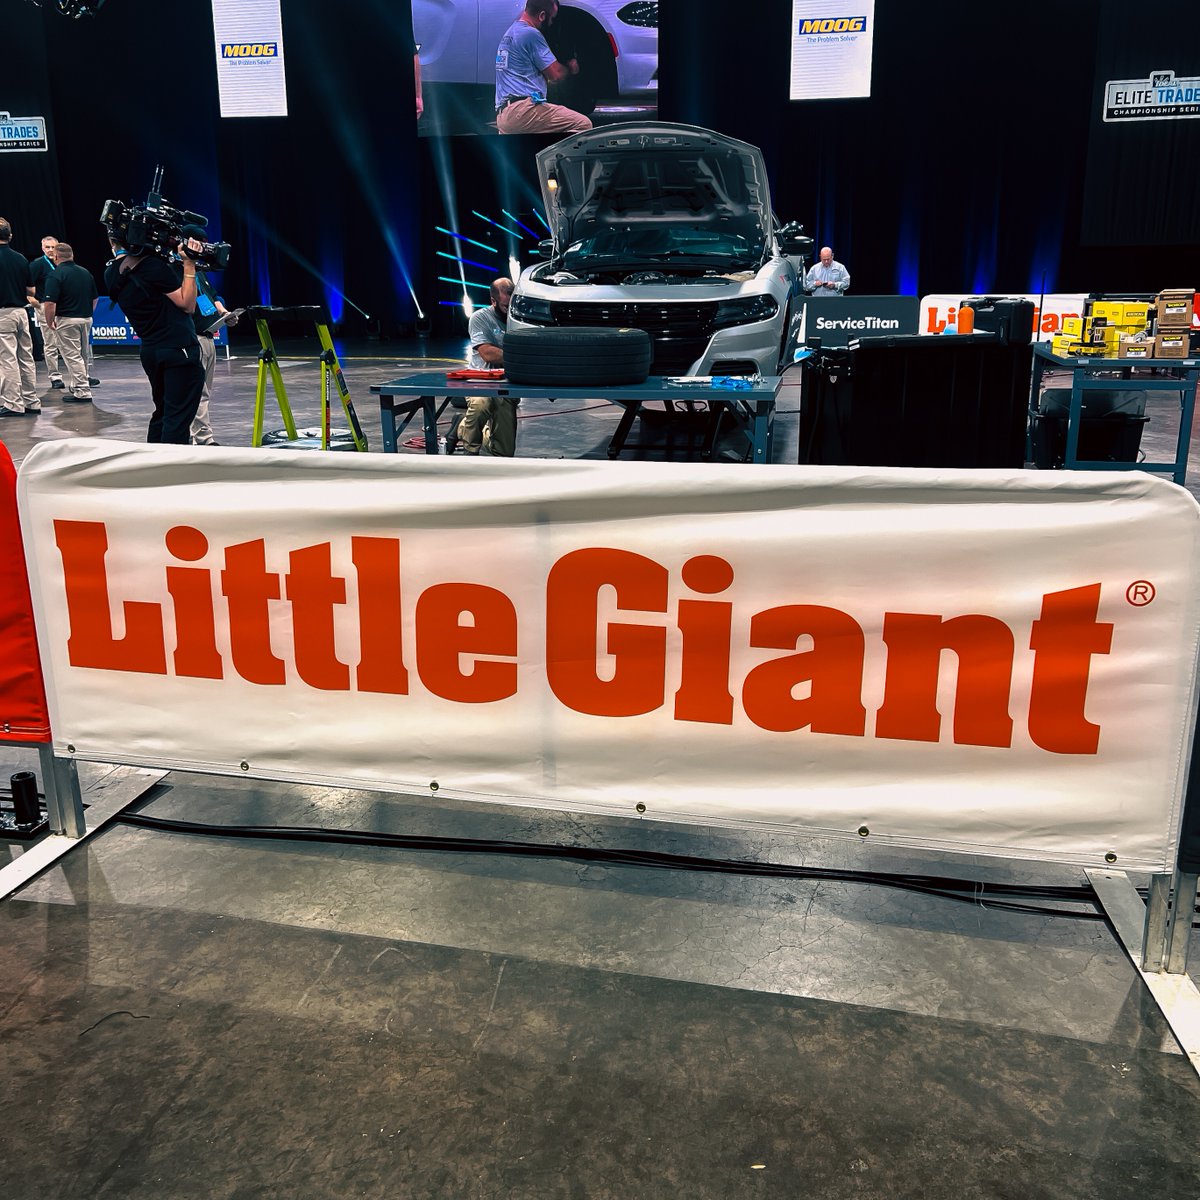 We are grateful for our partner @littlegiant who puts safety above all else. Thank you for equipping our competitors with a climbing solution that's best suited for the job at hand. #ETCS23 #USATNC